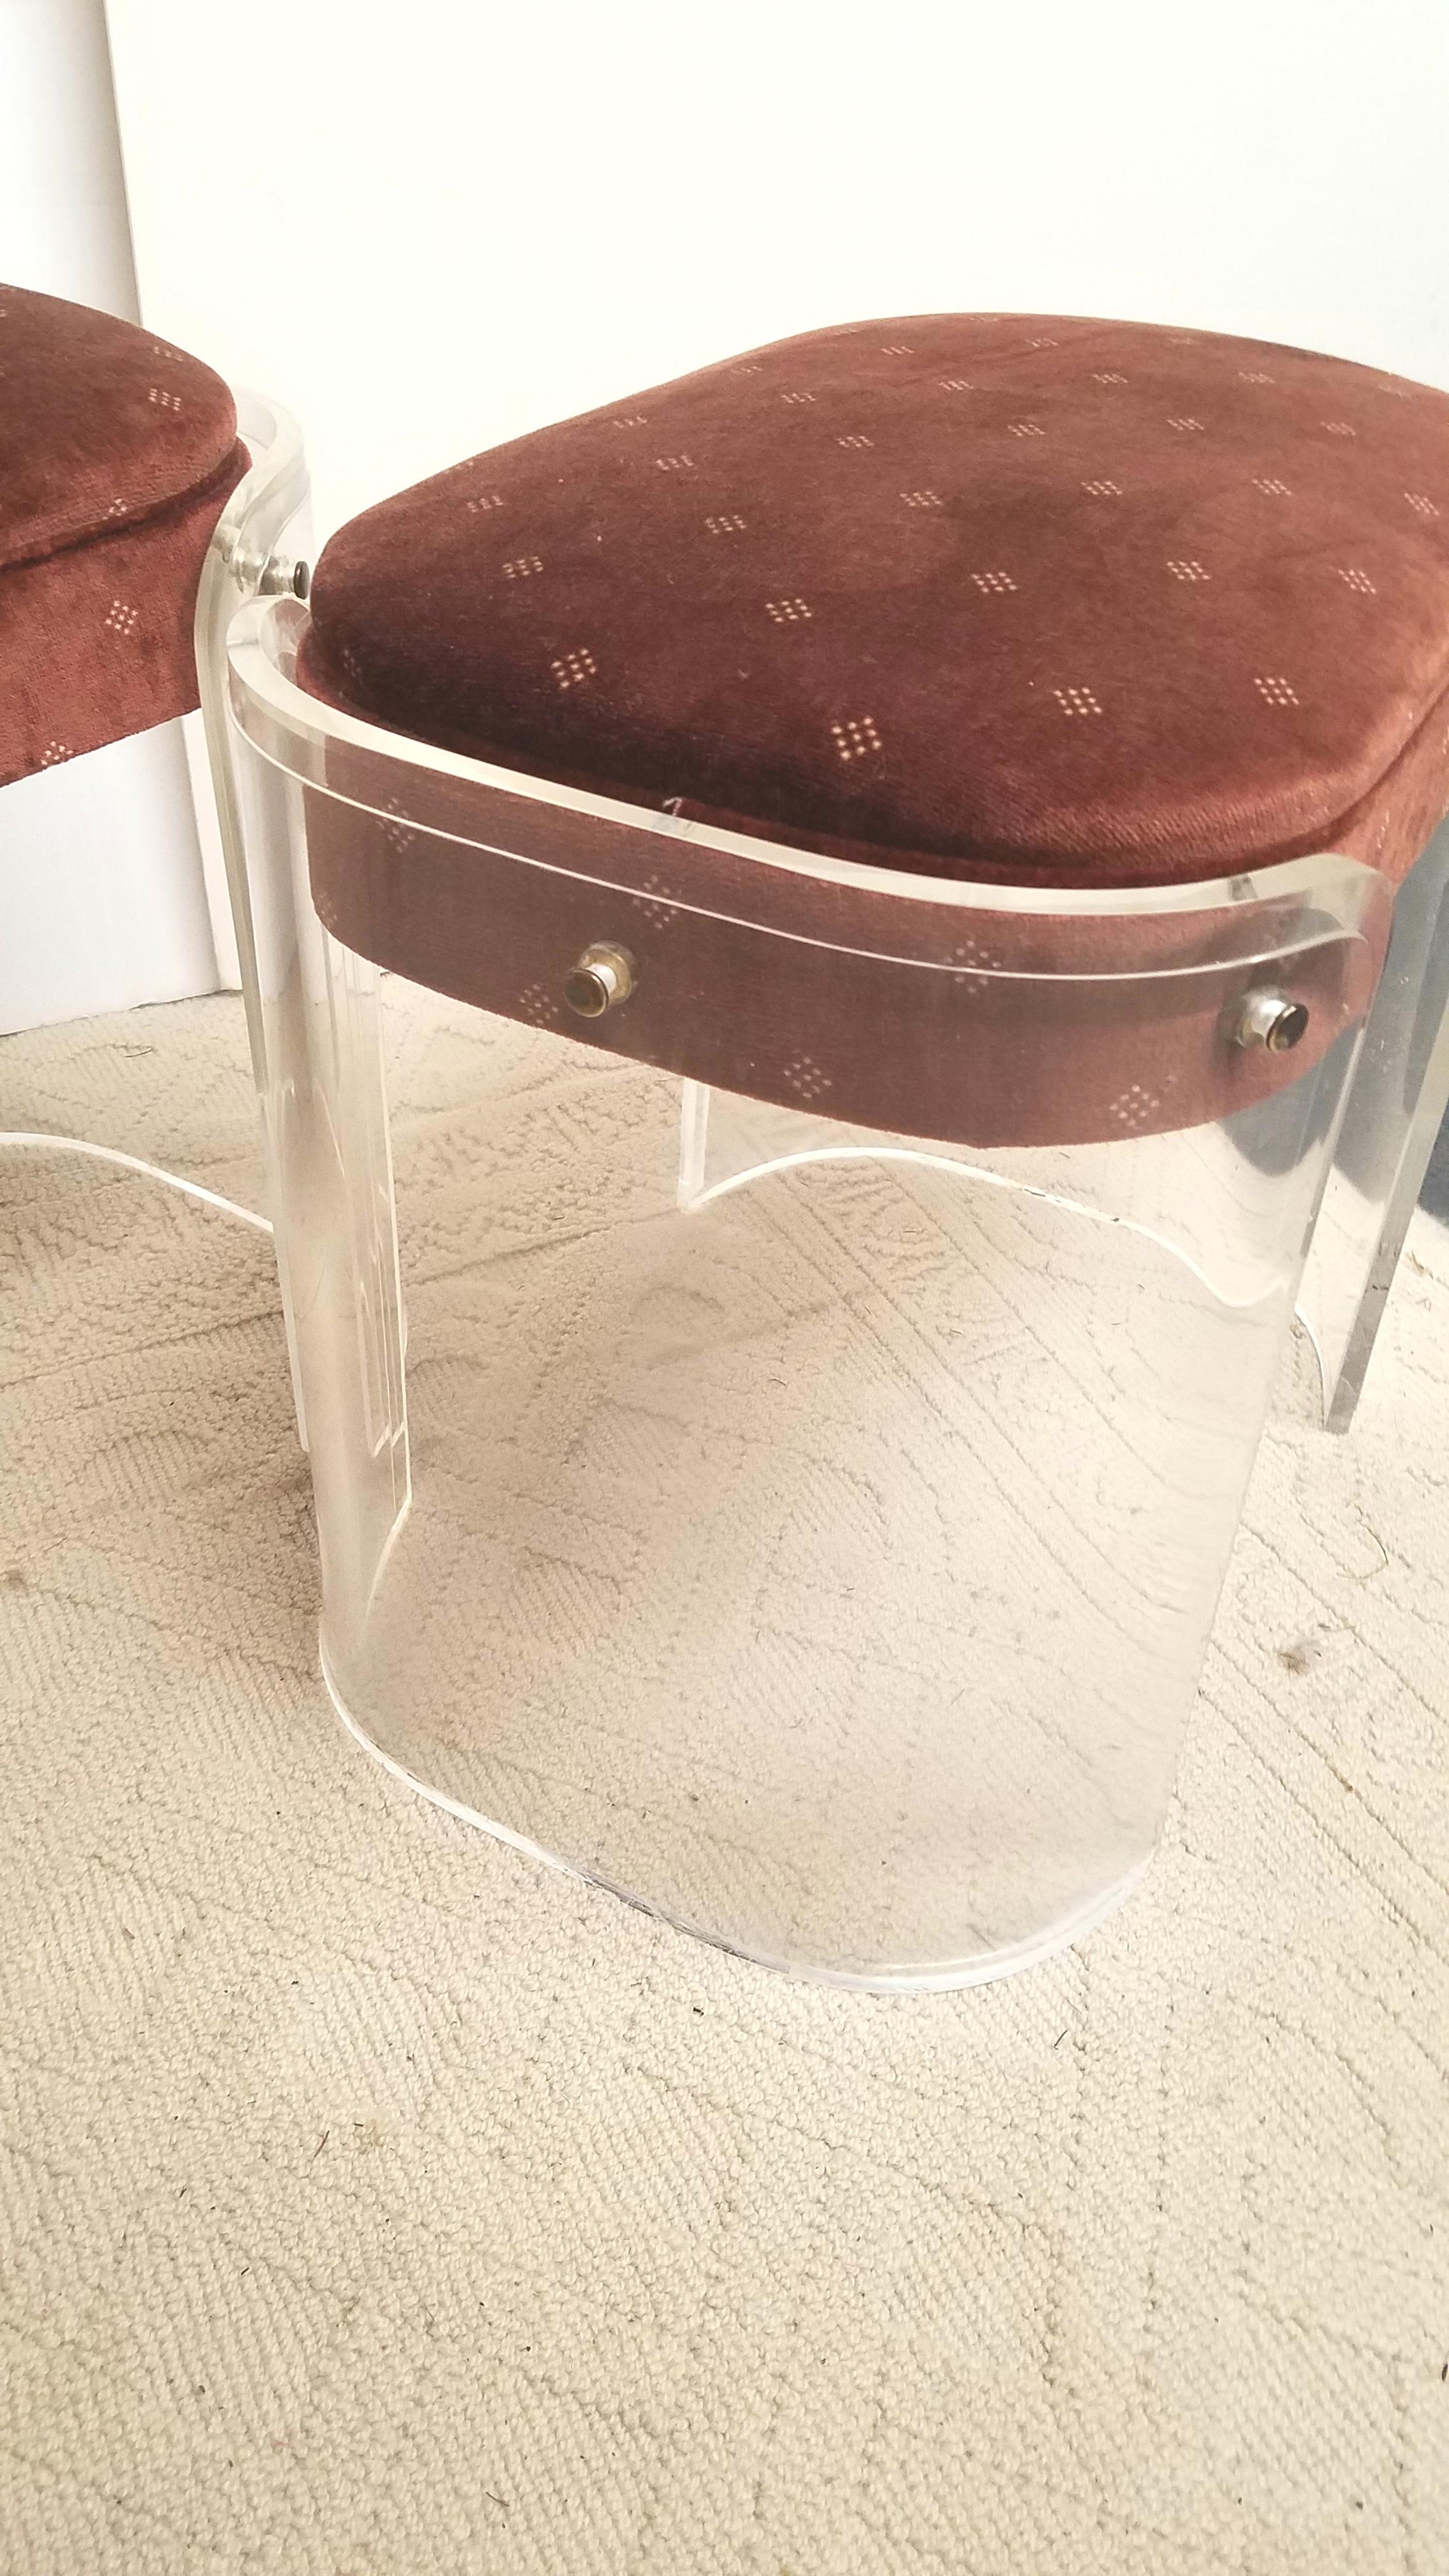 A chic pair of 1970s Lucite benches in original chocolate brown velvet in very good condition. The curved Lucite sides with an upholstered seat that could easily be recovered in a new fabric. Price is for the pair....